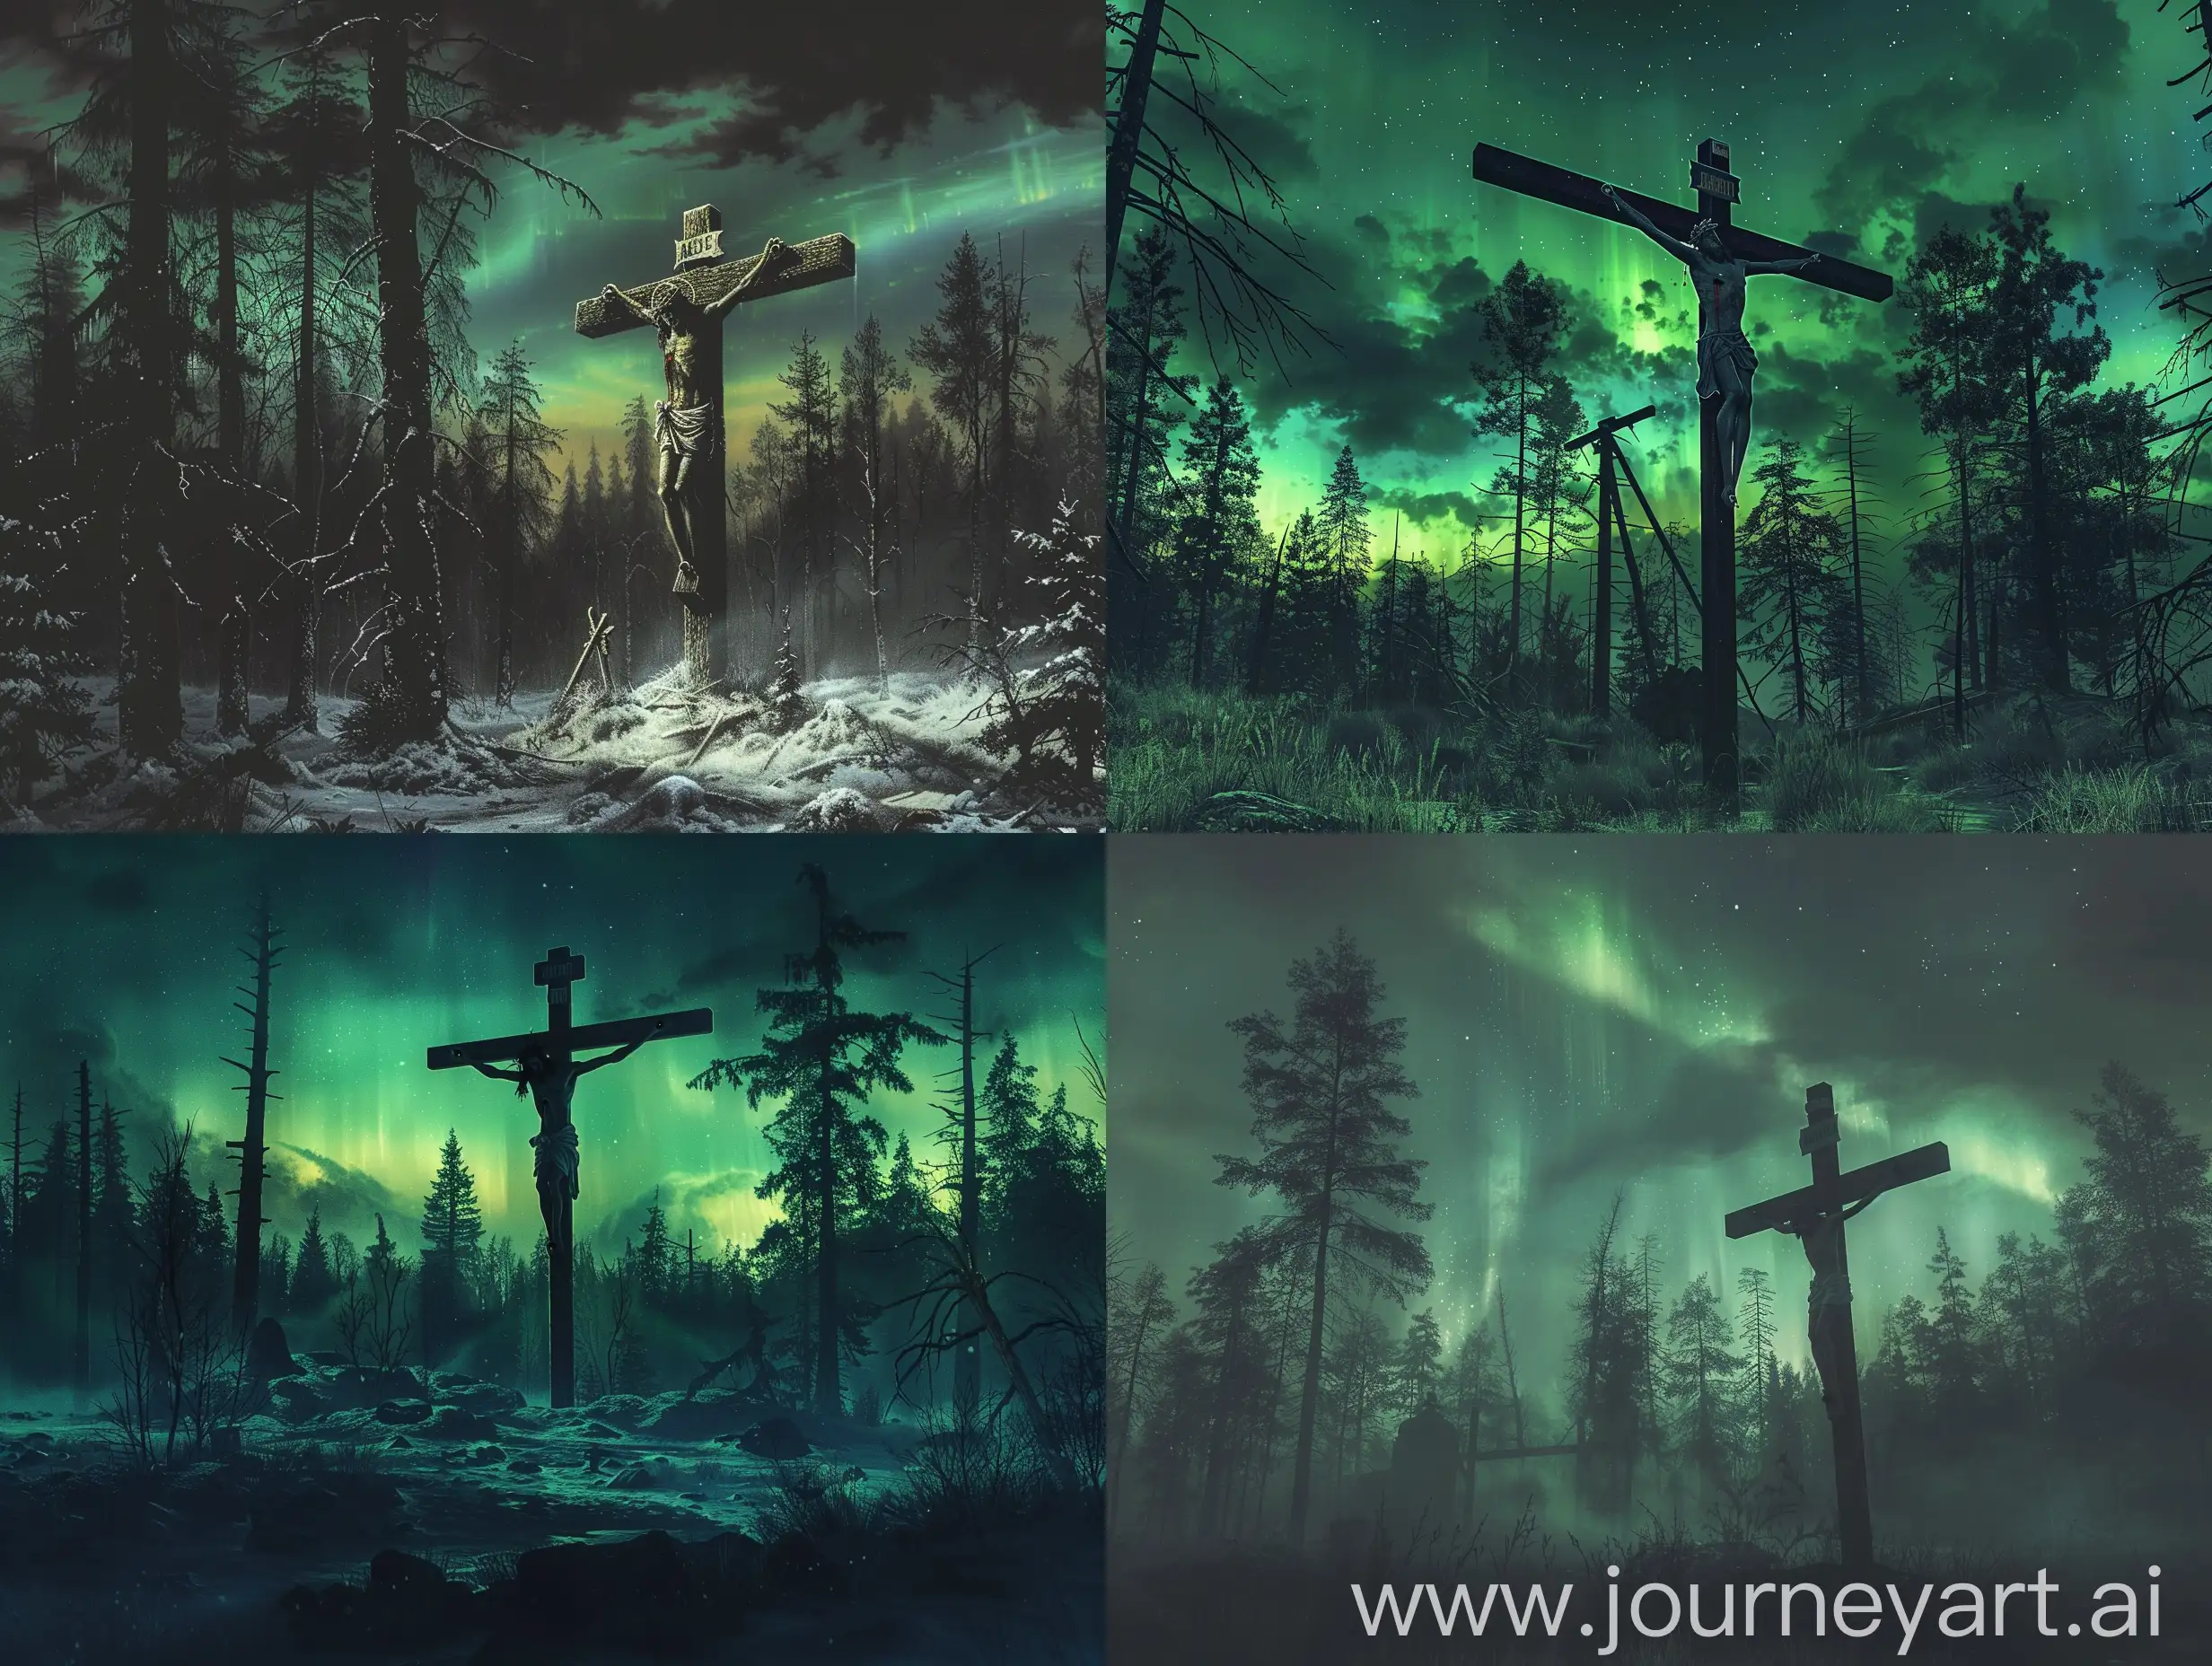 Crucifixion with Aurora Borealis: "A poignant scene of Christ's crucifixion in a medieval Russian setting, with the aurora borealis illuminating the darkened sky, creating an ethereal glow on the surrounding taiga forest." based in Anatoly Timofeevich Fomenko e Gleb Vladimirovich Nosovsk books